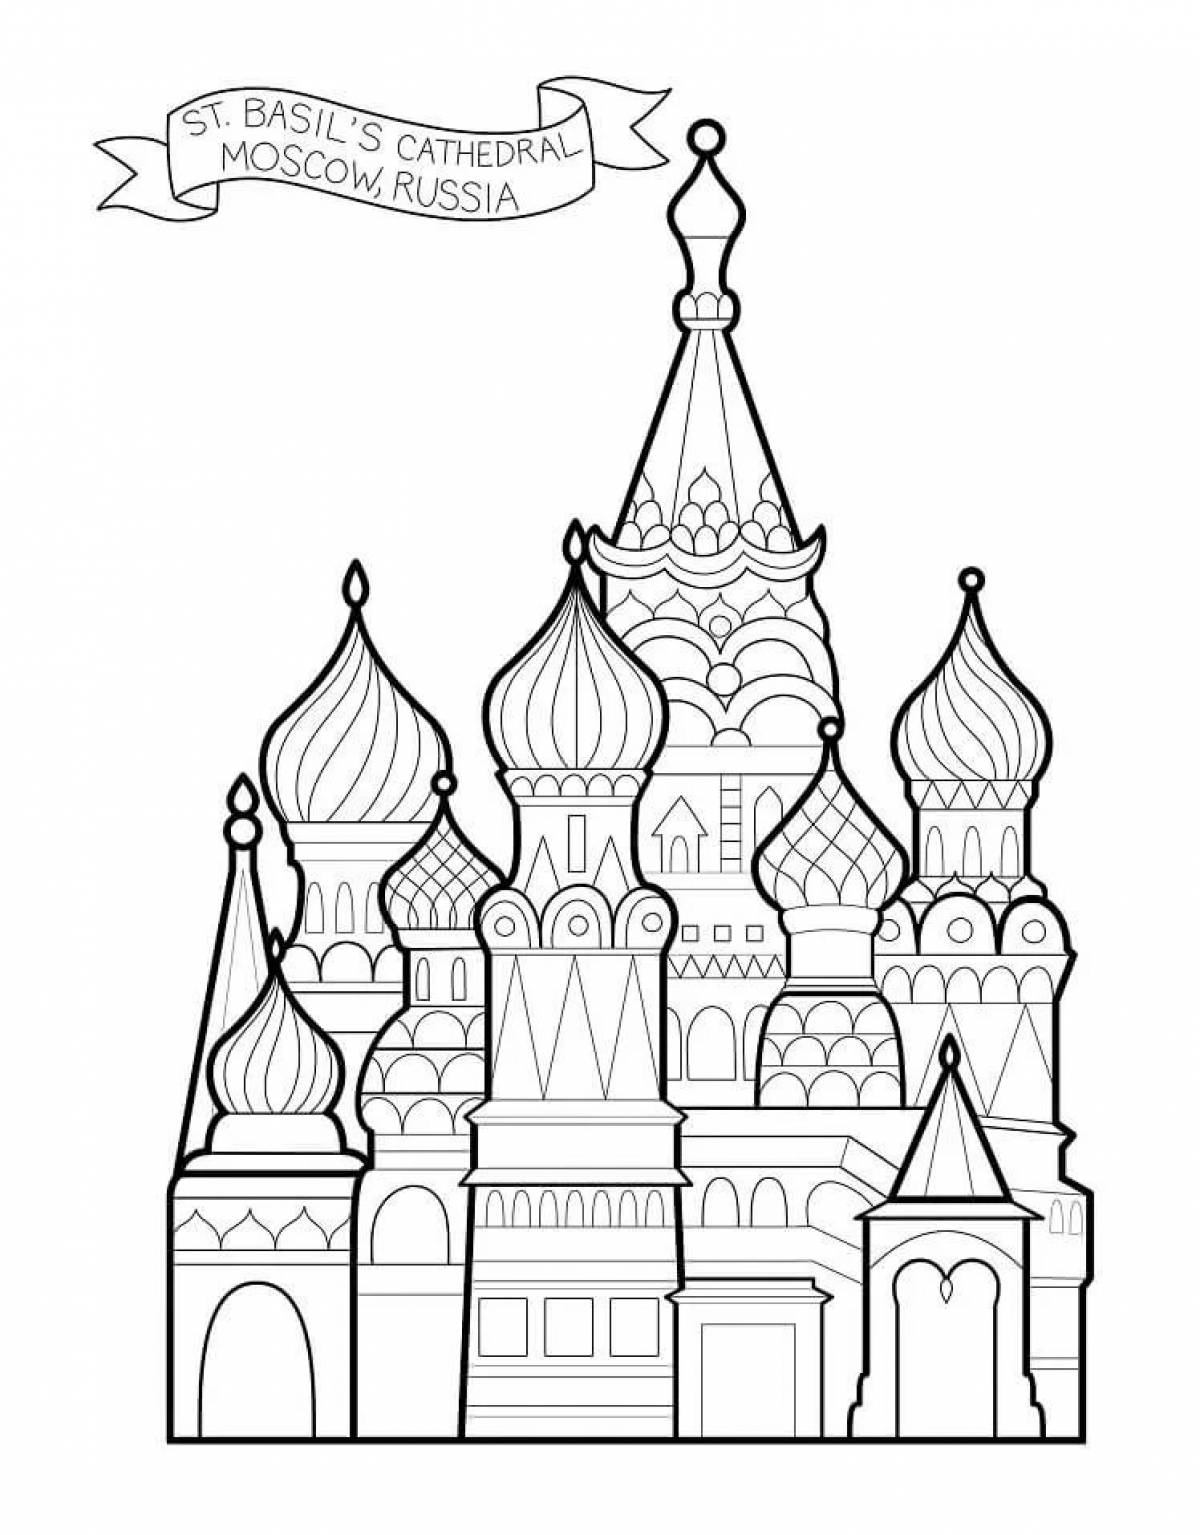 St. Basil's Cathedral #5